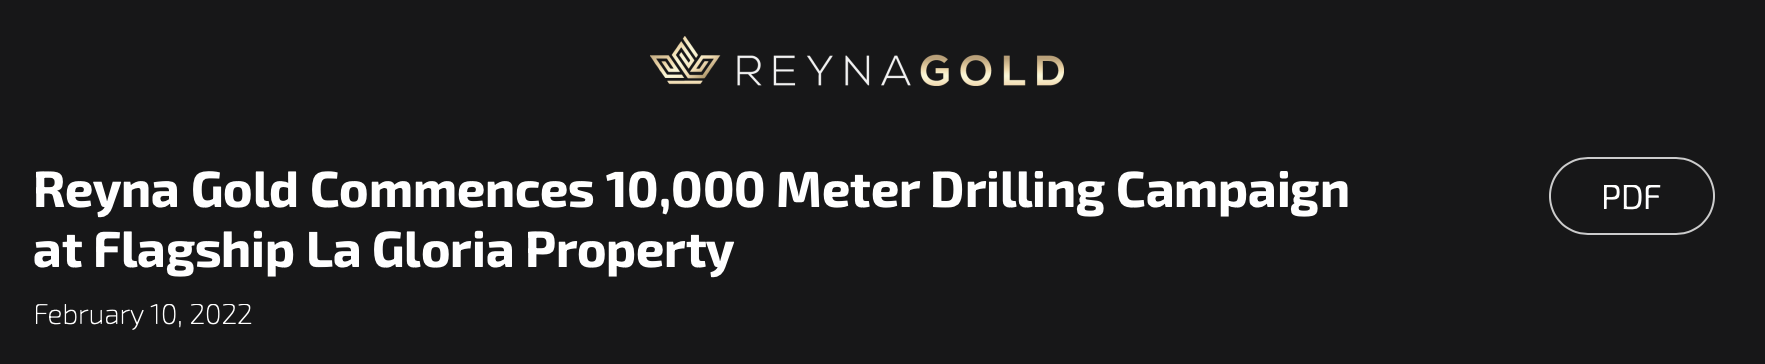 Reyna Gold Commences 10,000 Meter Drilling Campaign at Flagship La Gloria Property